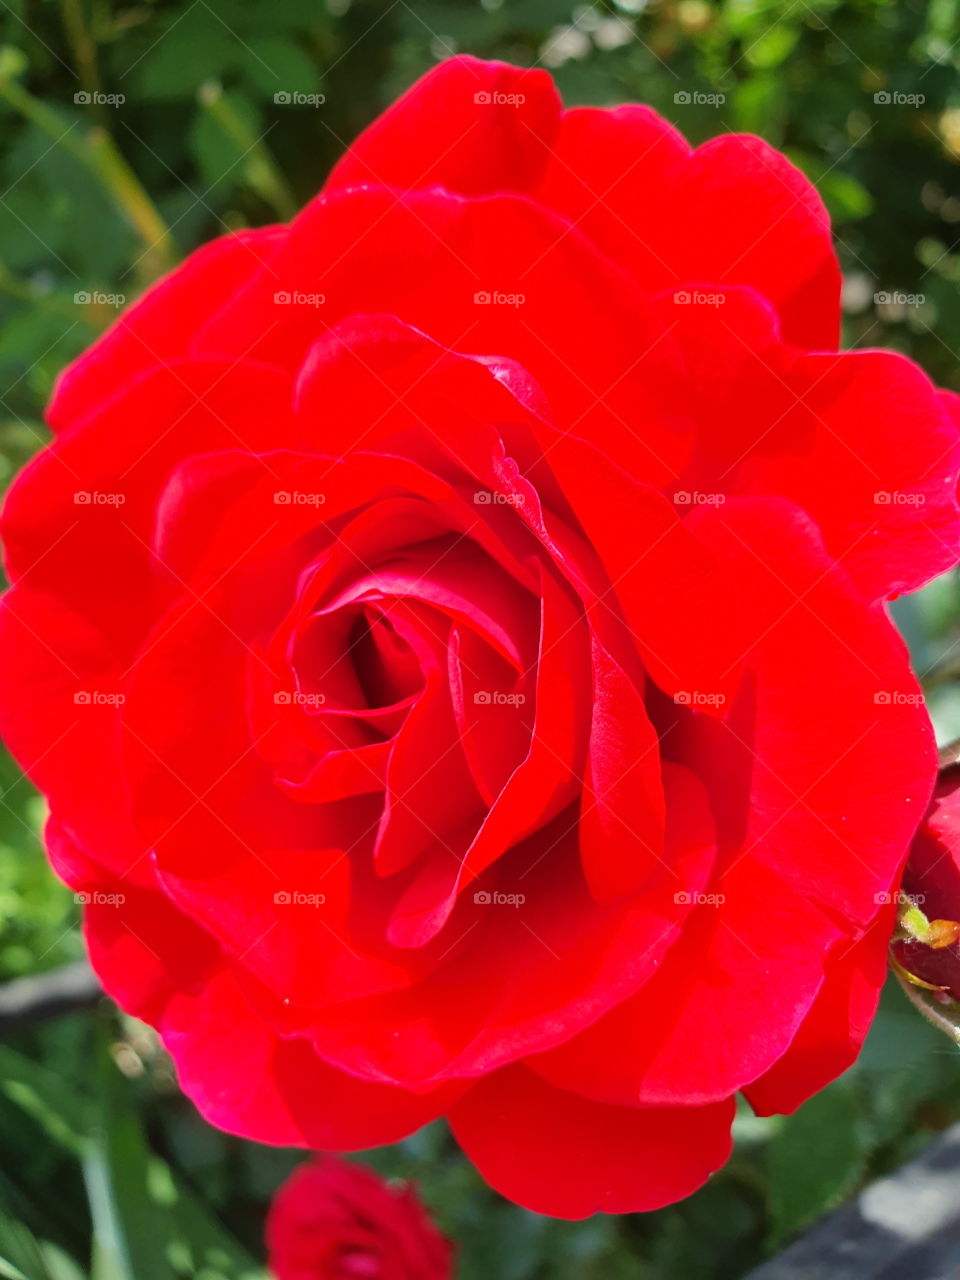 bright red juicy rose in the garden